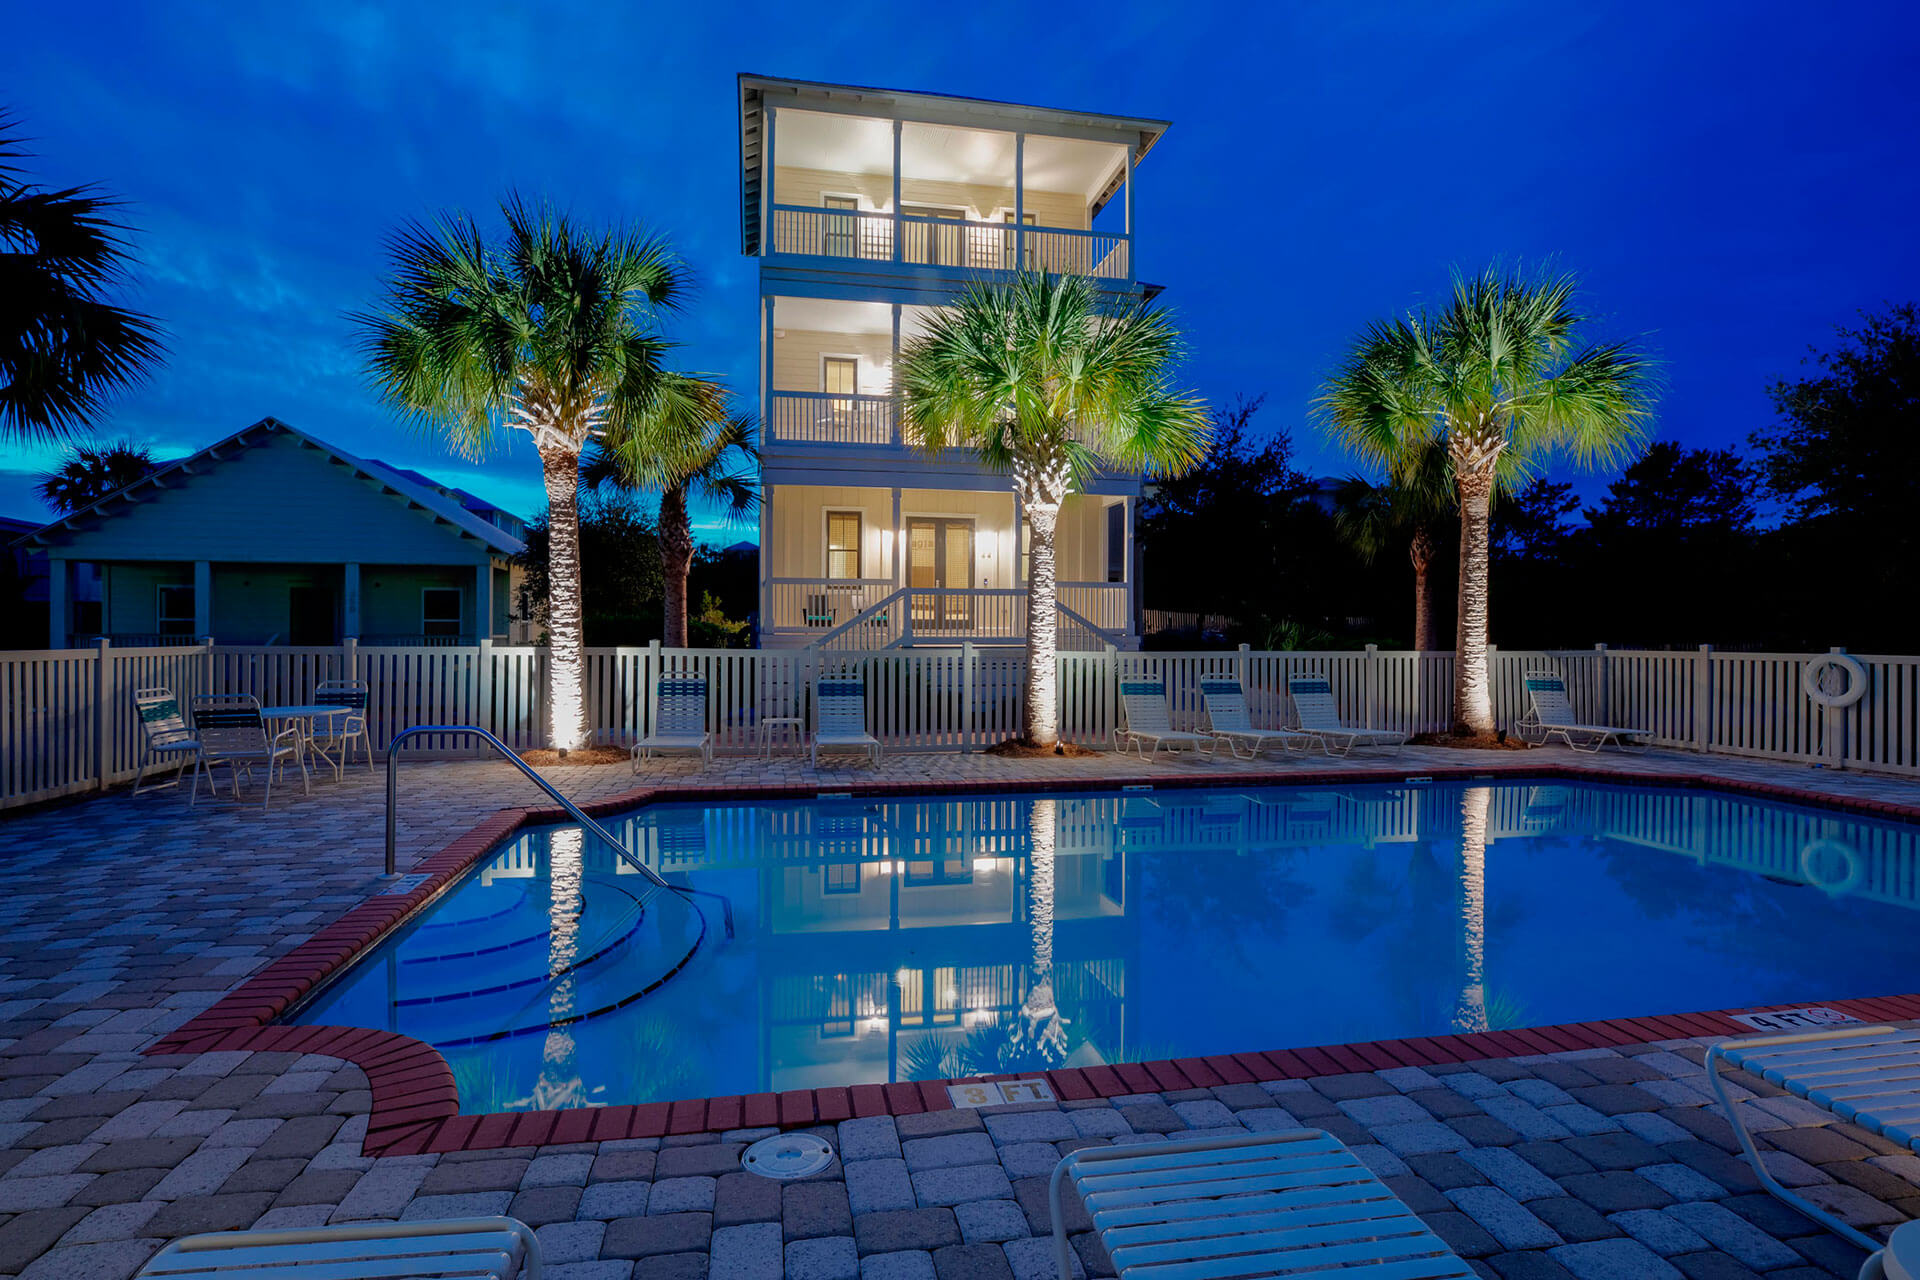 30A Florida Vacation Rentals By 30A Beach Girls Book The Top Vacation